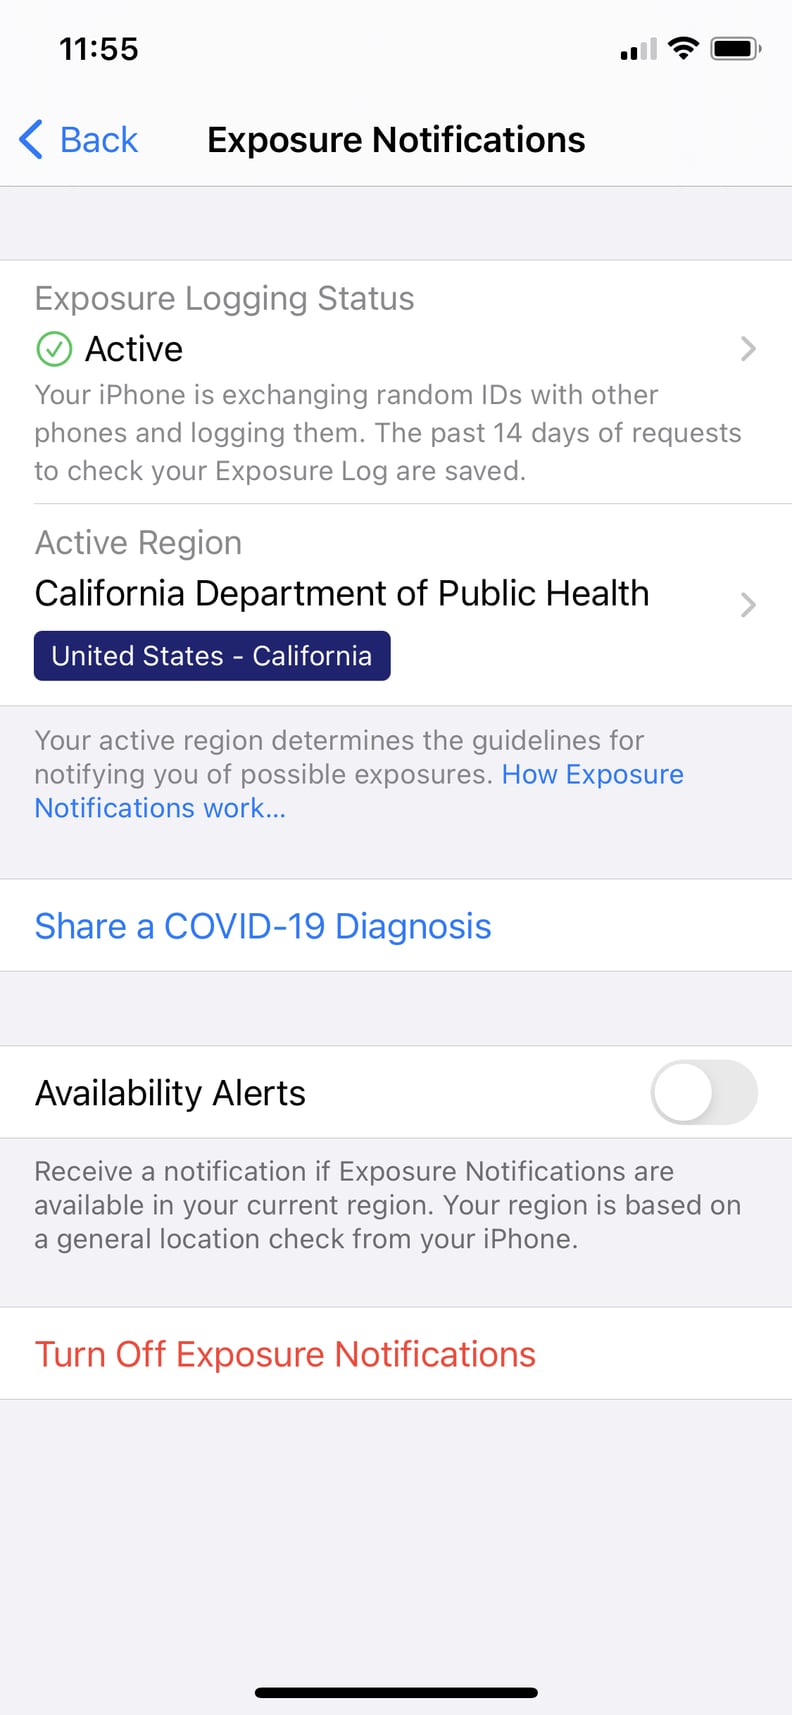 If You're Exposed to COVID-19, You Can Share Health Updates Under "Share a COVID-19 Diagnosis"